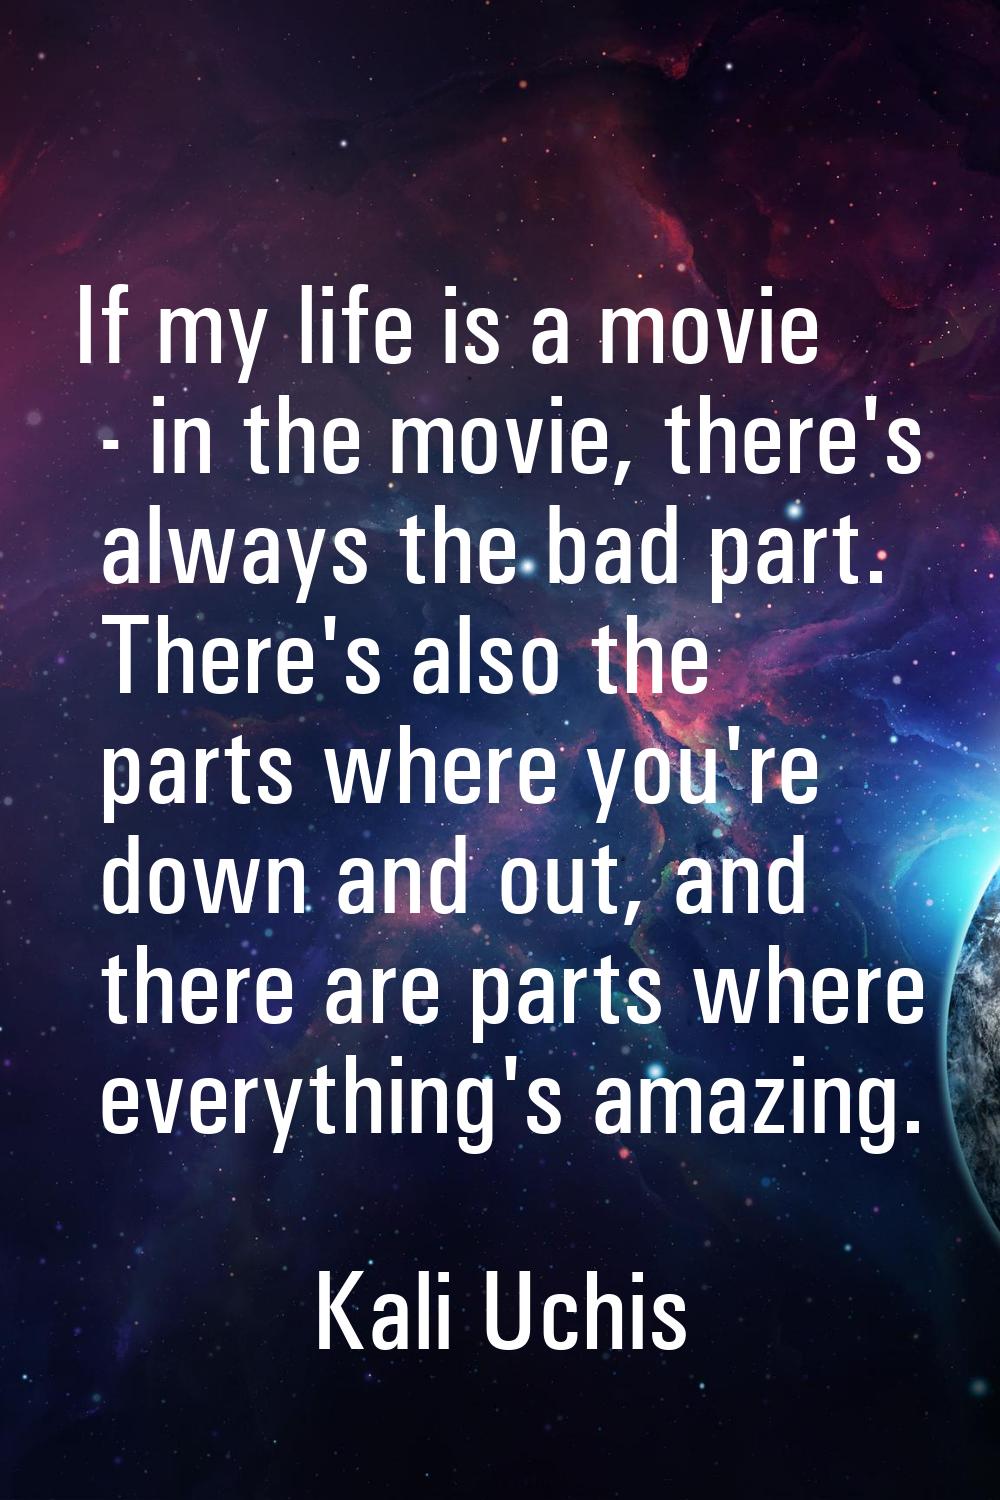 If my life is a movie - in the movie, there's always the bad part. There's also the parts where you